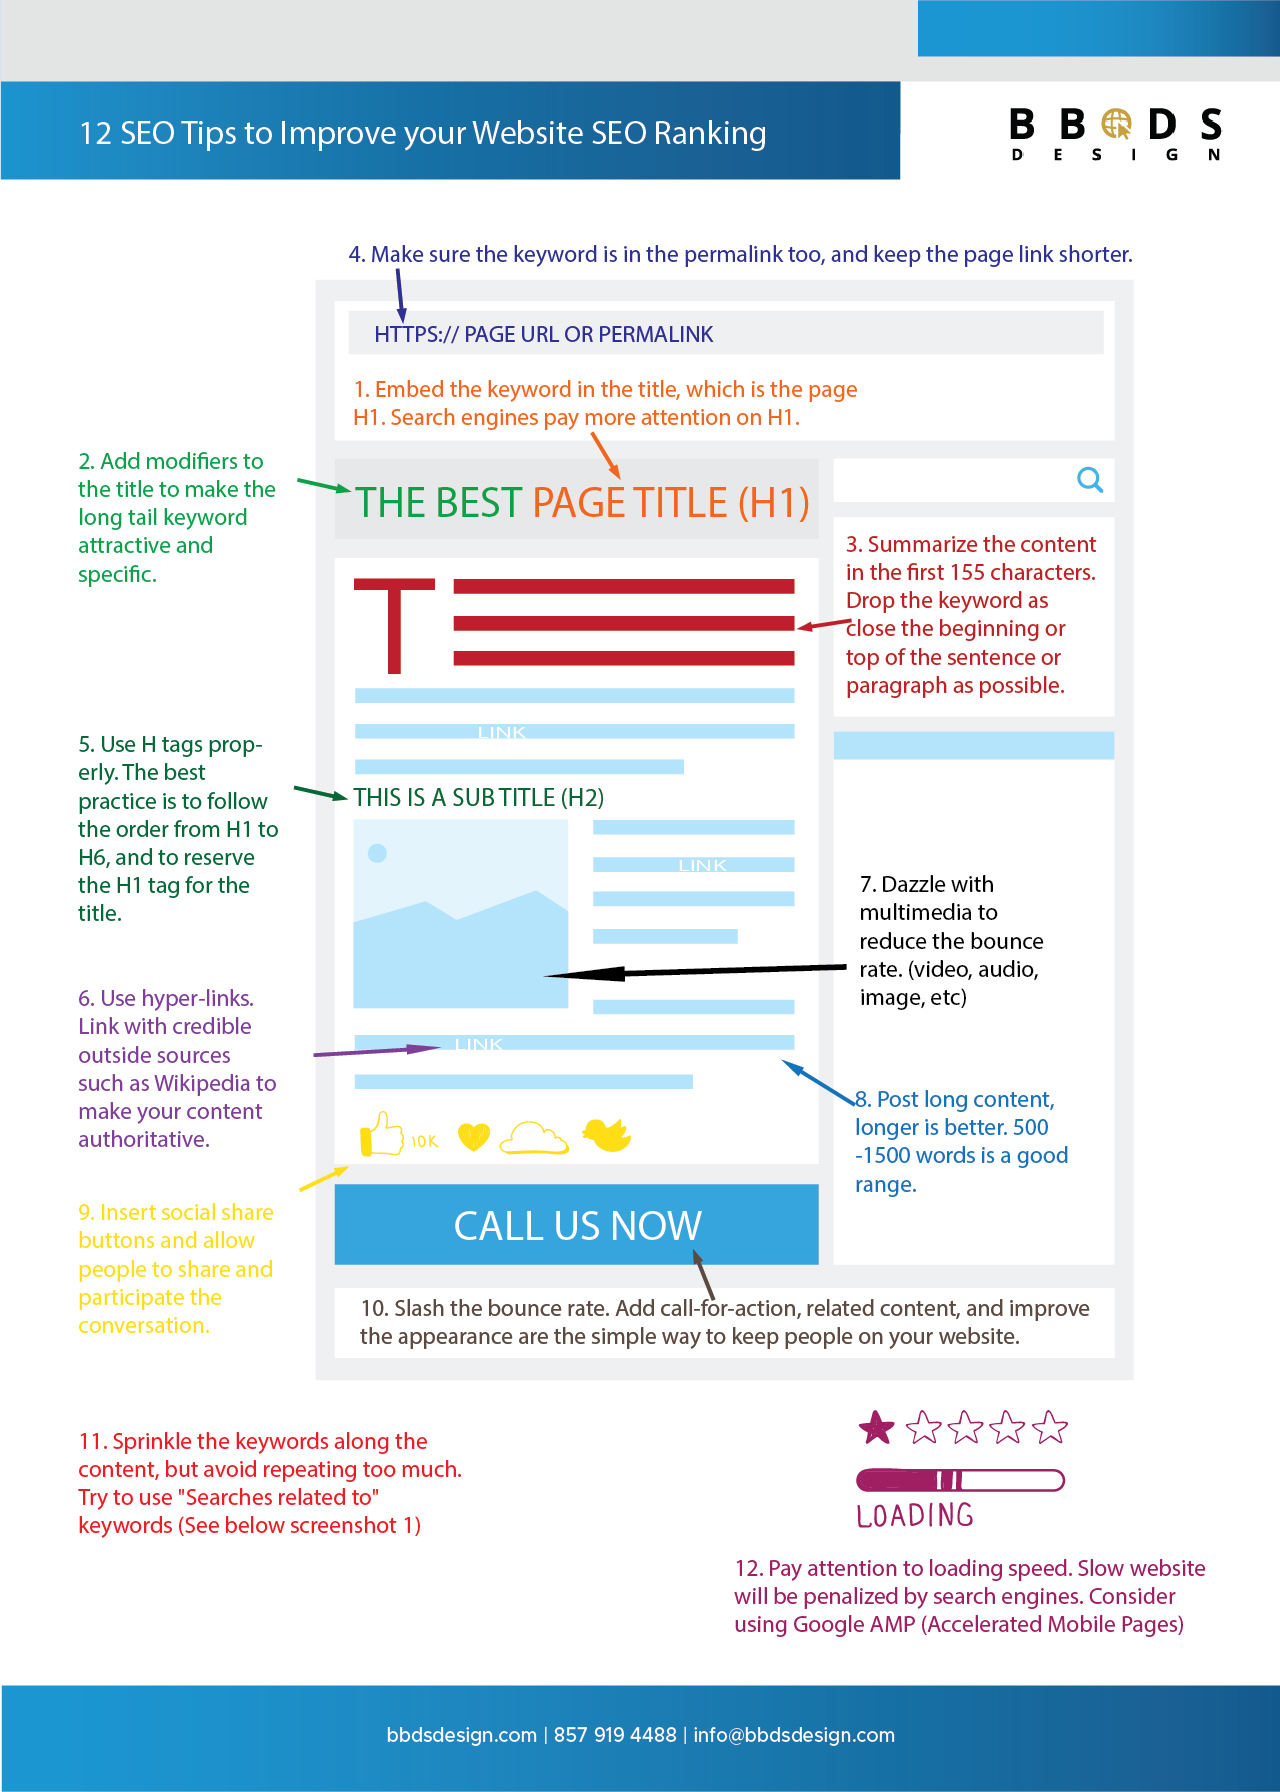 12 SEO Tips to Improve your Website SEO Ranking, infographic by BBDS Design